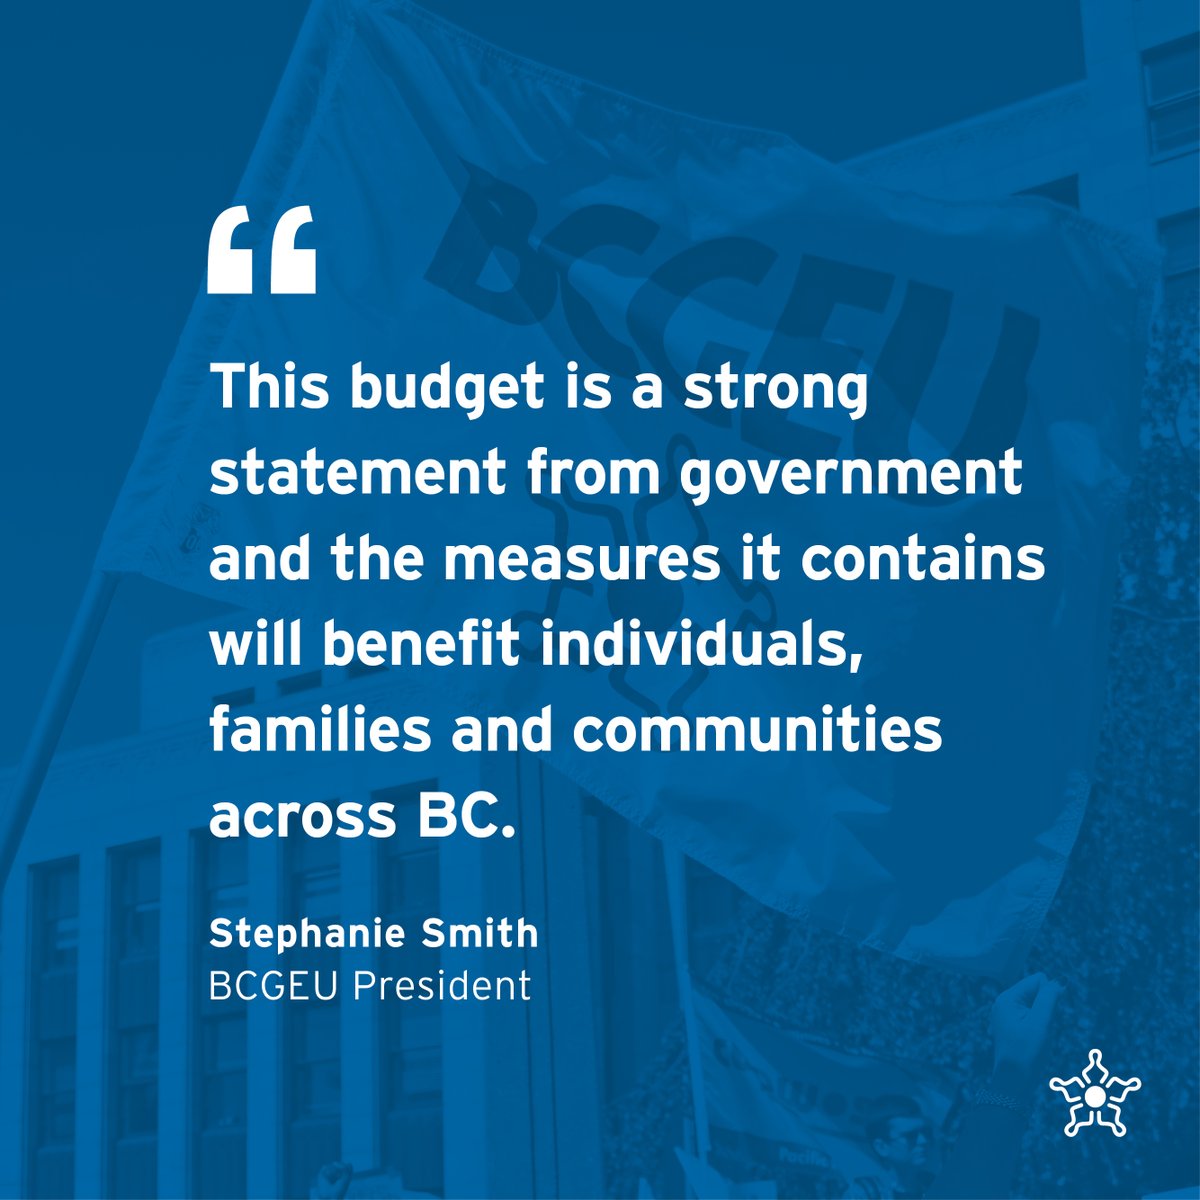 'The provincial government has released their budget for the coming fiscal year. The BCGEU is pleased that government resisted pressure to cut funding and instead tabled a budget built on meaningful investments in people and public services — including increased support for…